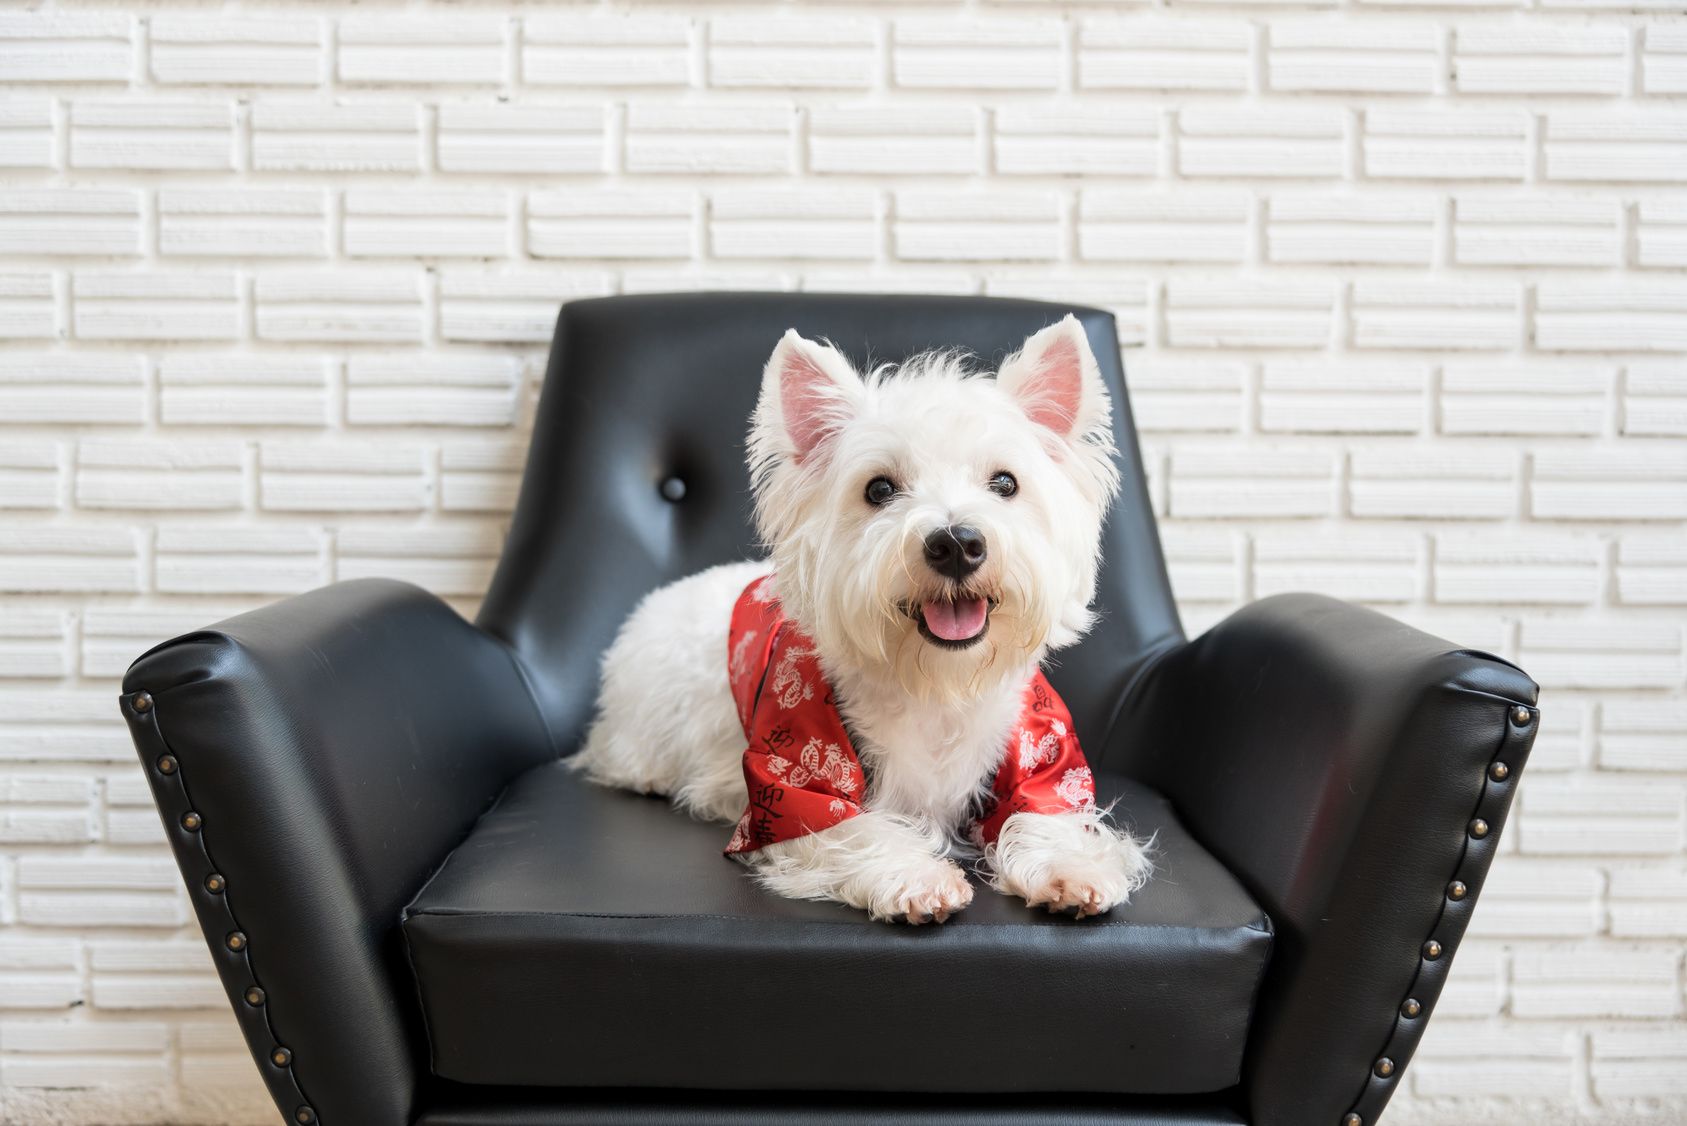 White terrier or westie highland dog sitting on a black chair and smiling